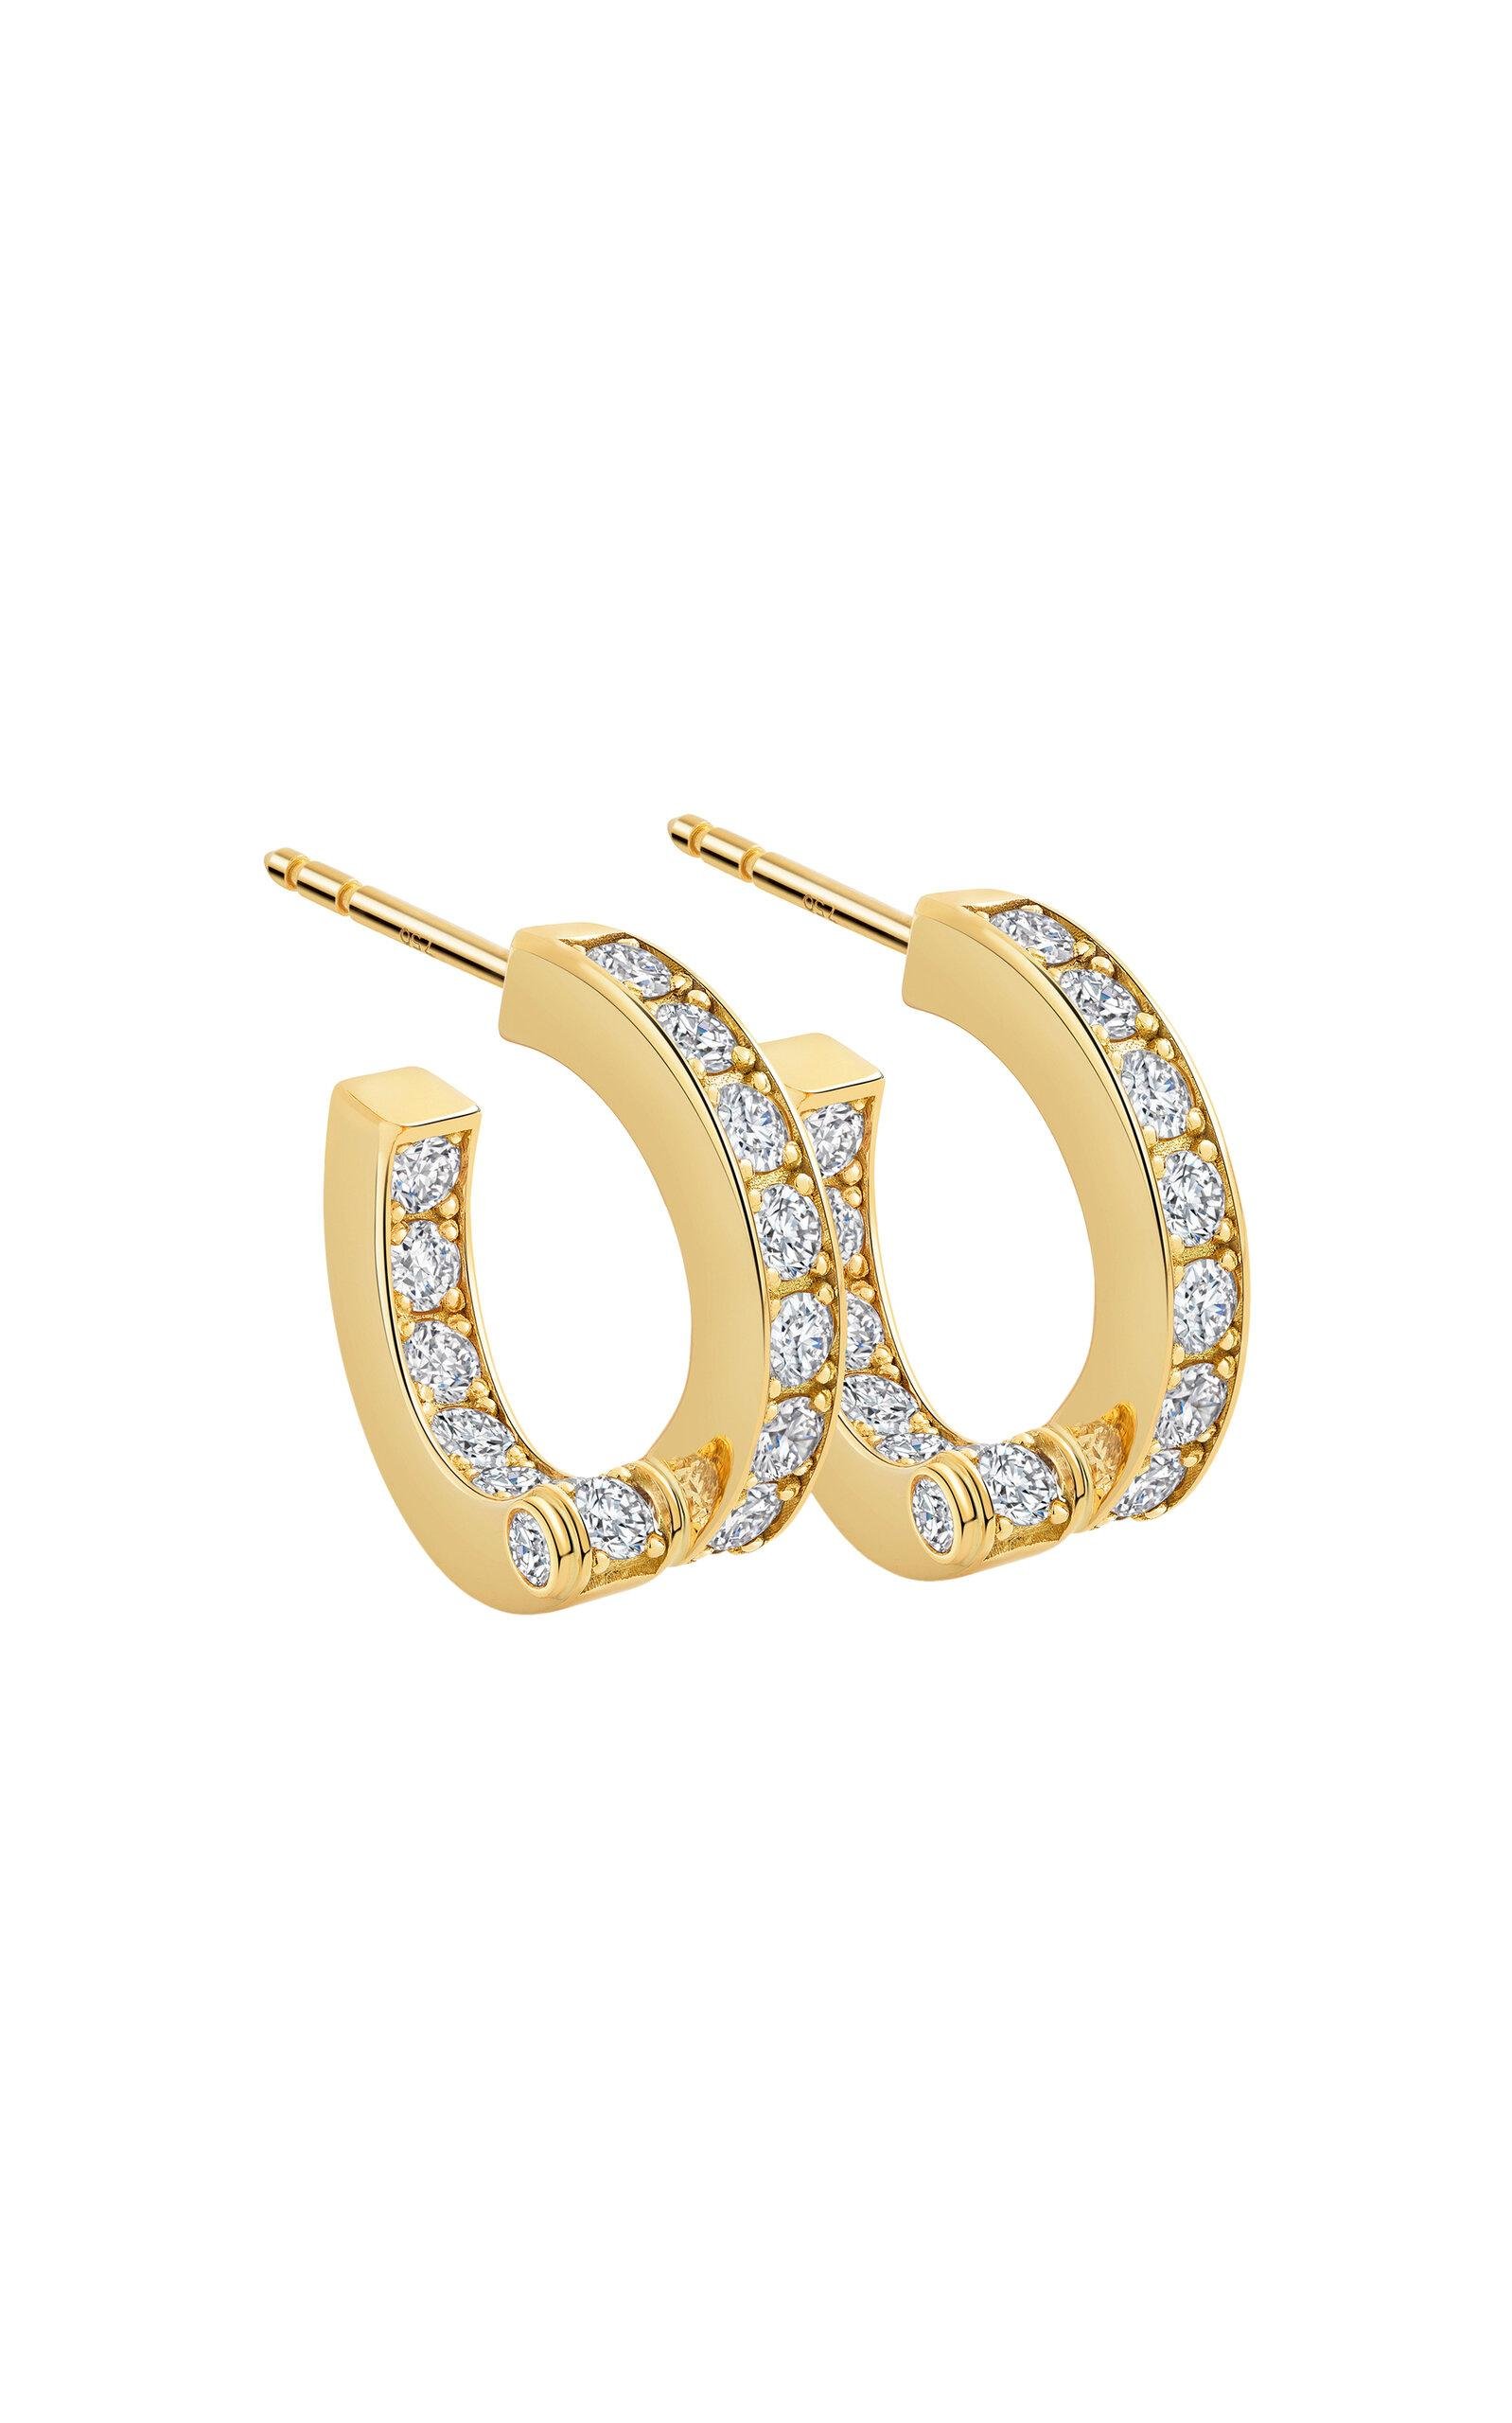 Erede - 18k Yellow Gold Large Coil Pavé Hoop Earrings - Gold - OS - Only At Moda Operandi - Gifts For Her by EREDE